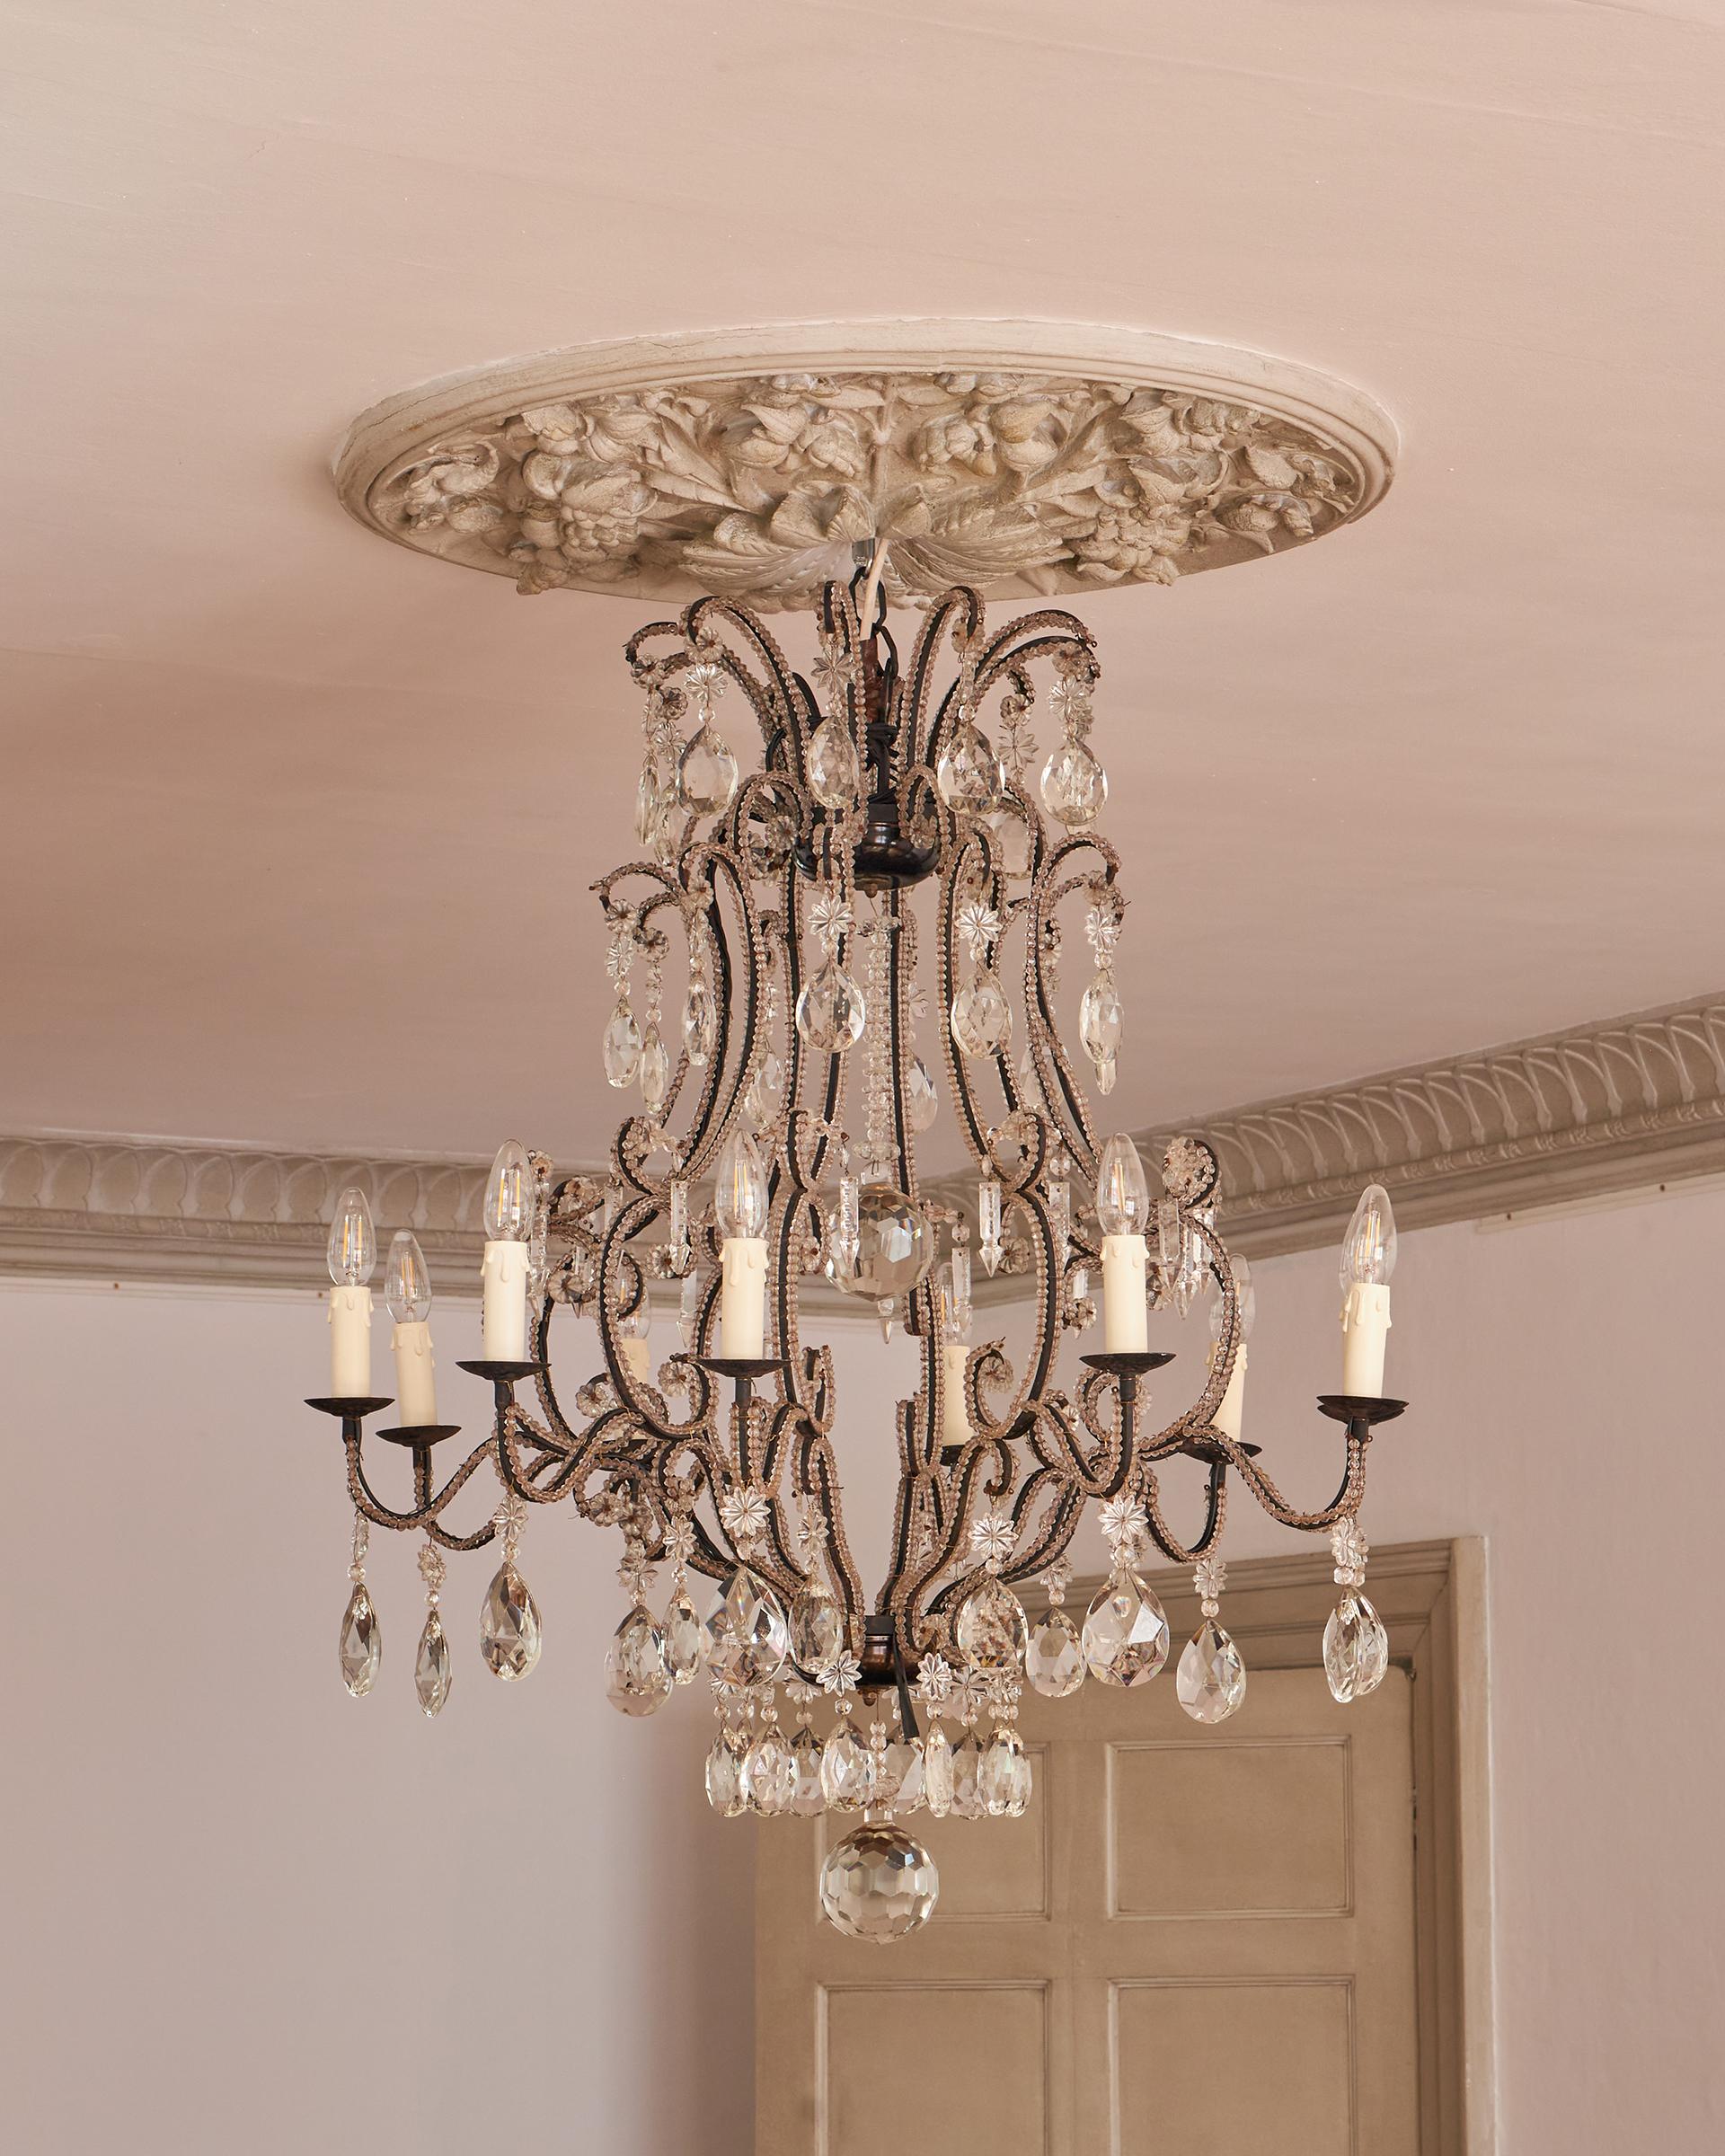 Large 19th Century Italian Chandelier fine crystal and iron ten light chandelier For Sale 1